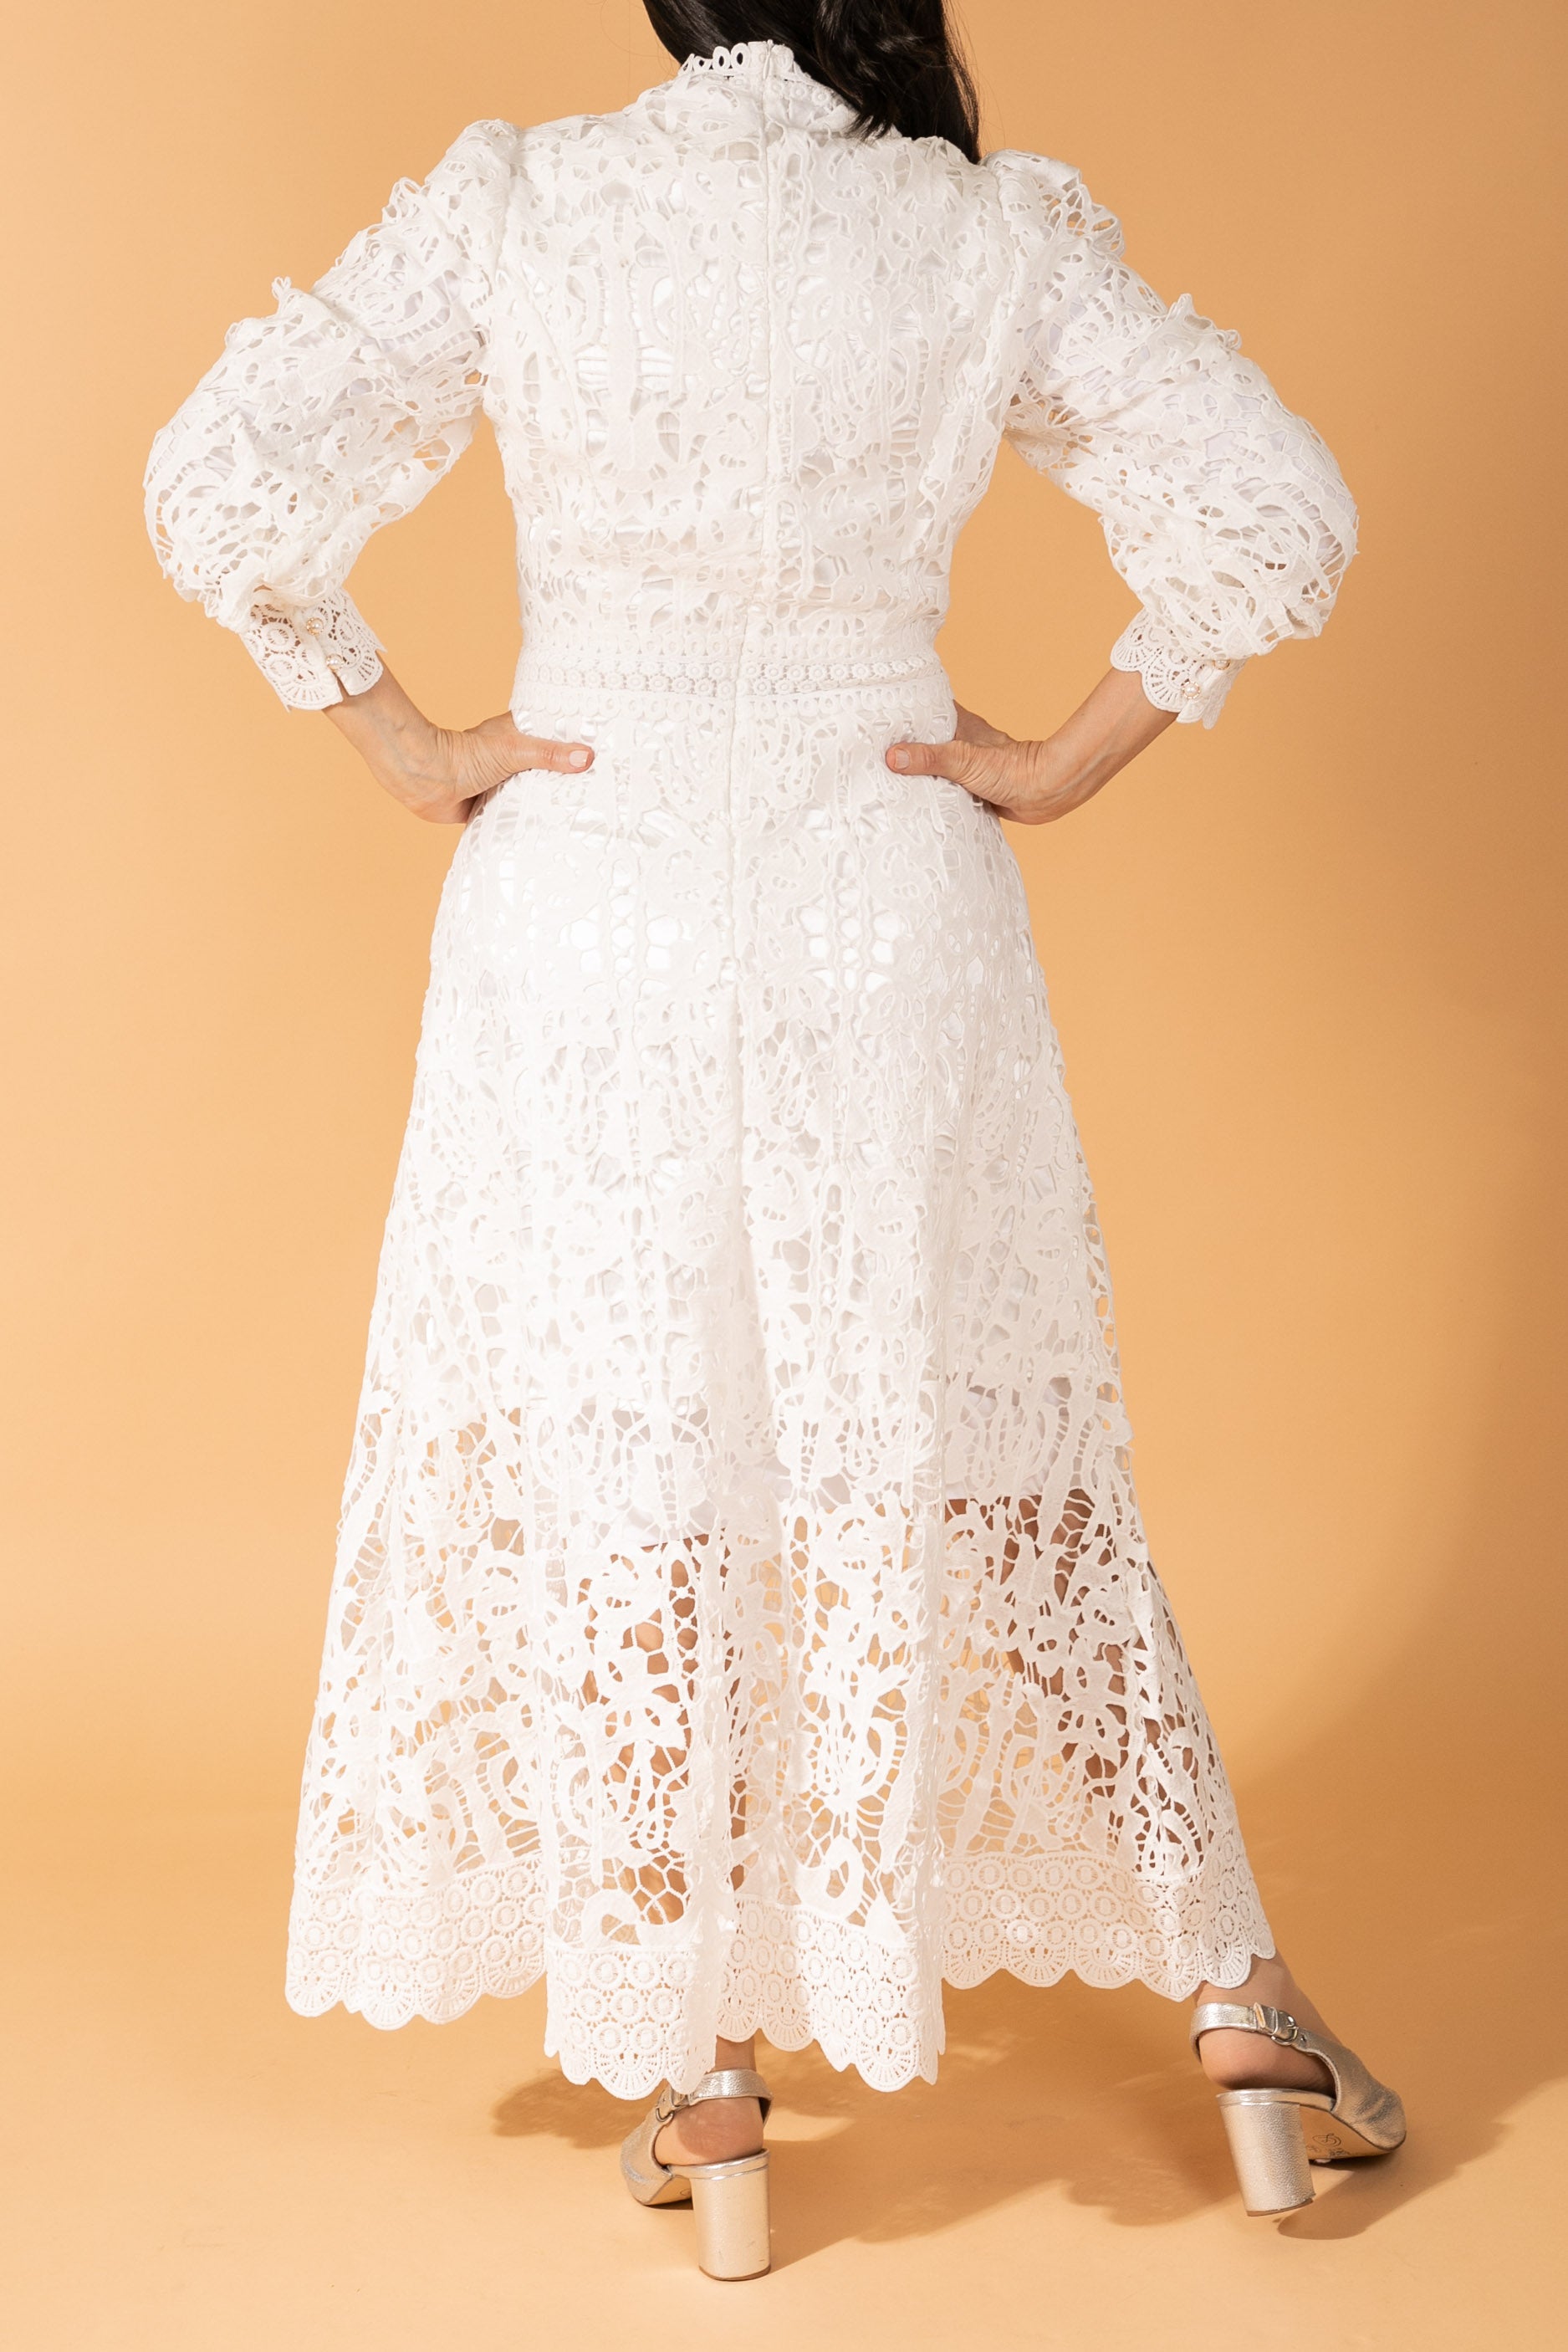 Dress in White Lace